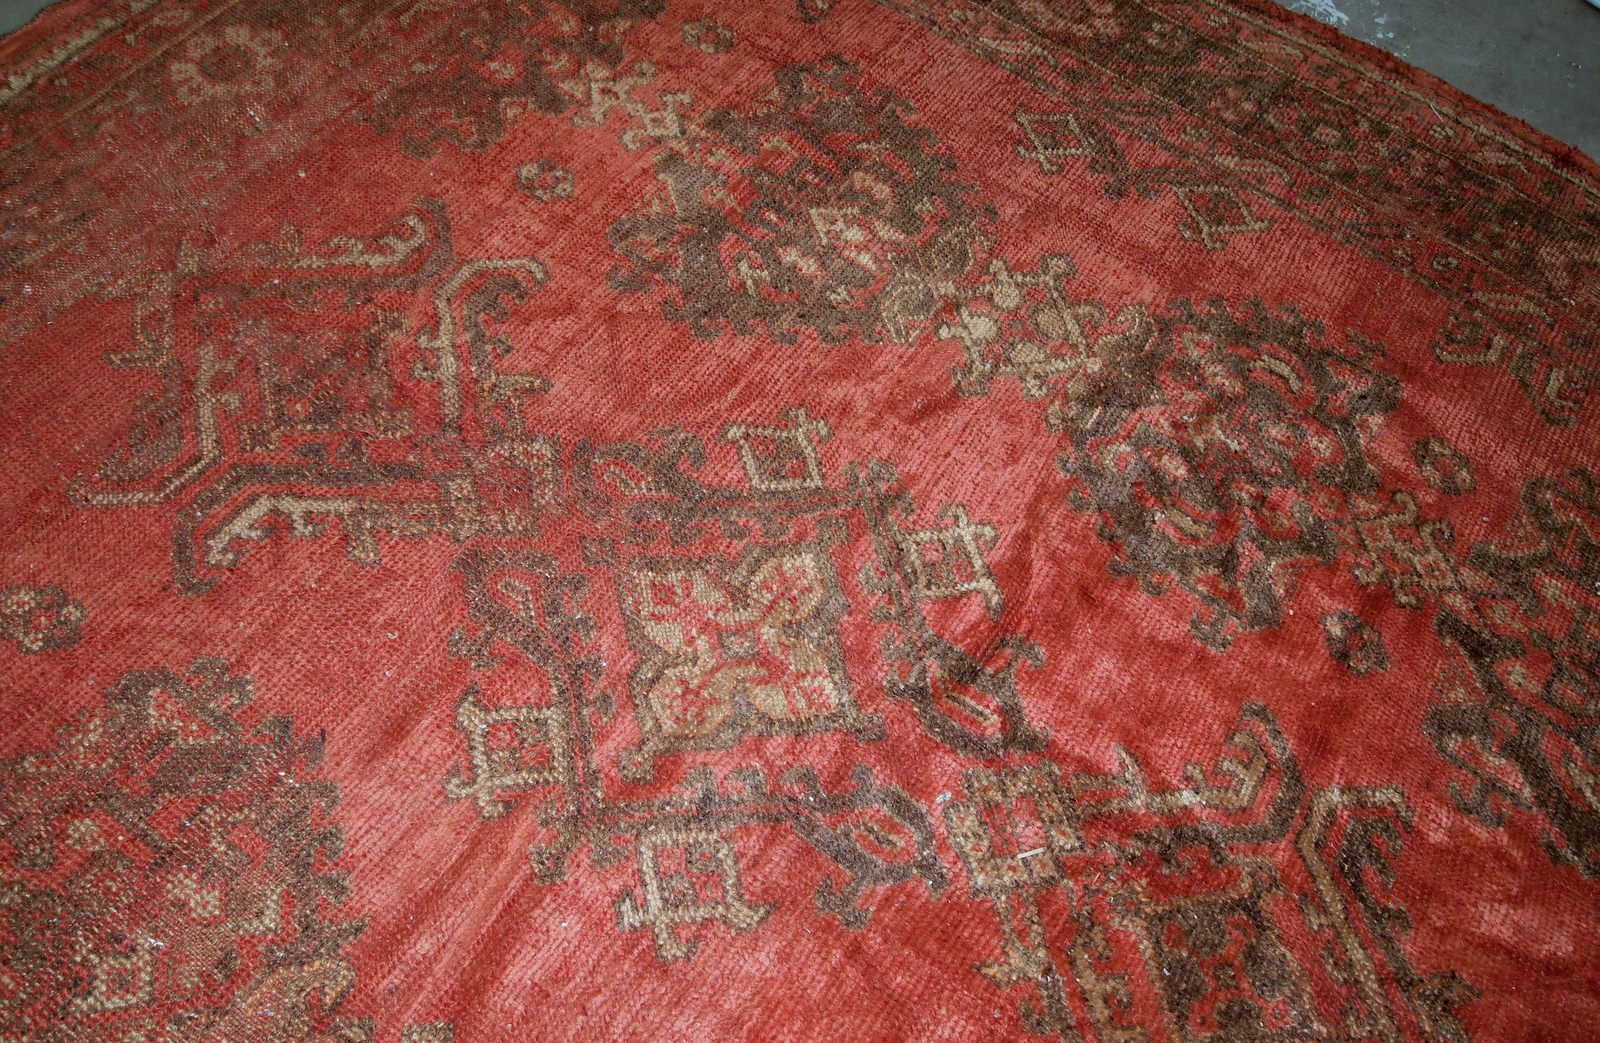 Antique handmade Turkish rug in orange color. The rug is from the beginning of 20th century in original condition, it has some signs of age.